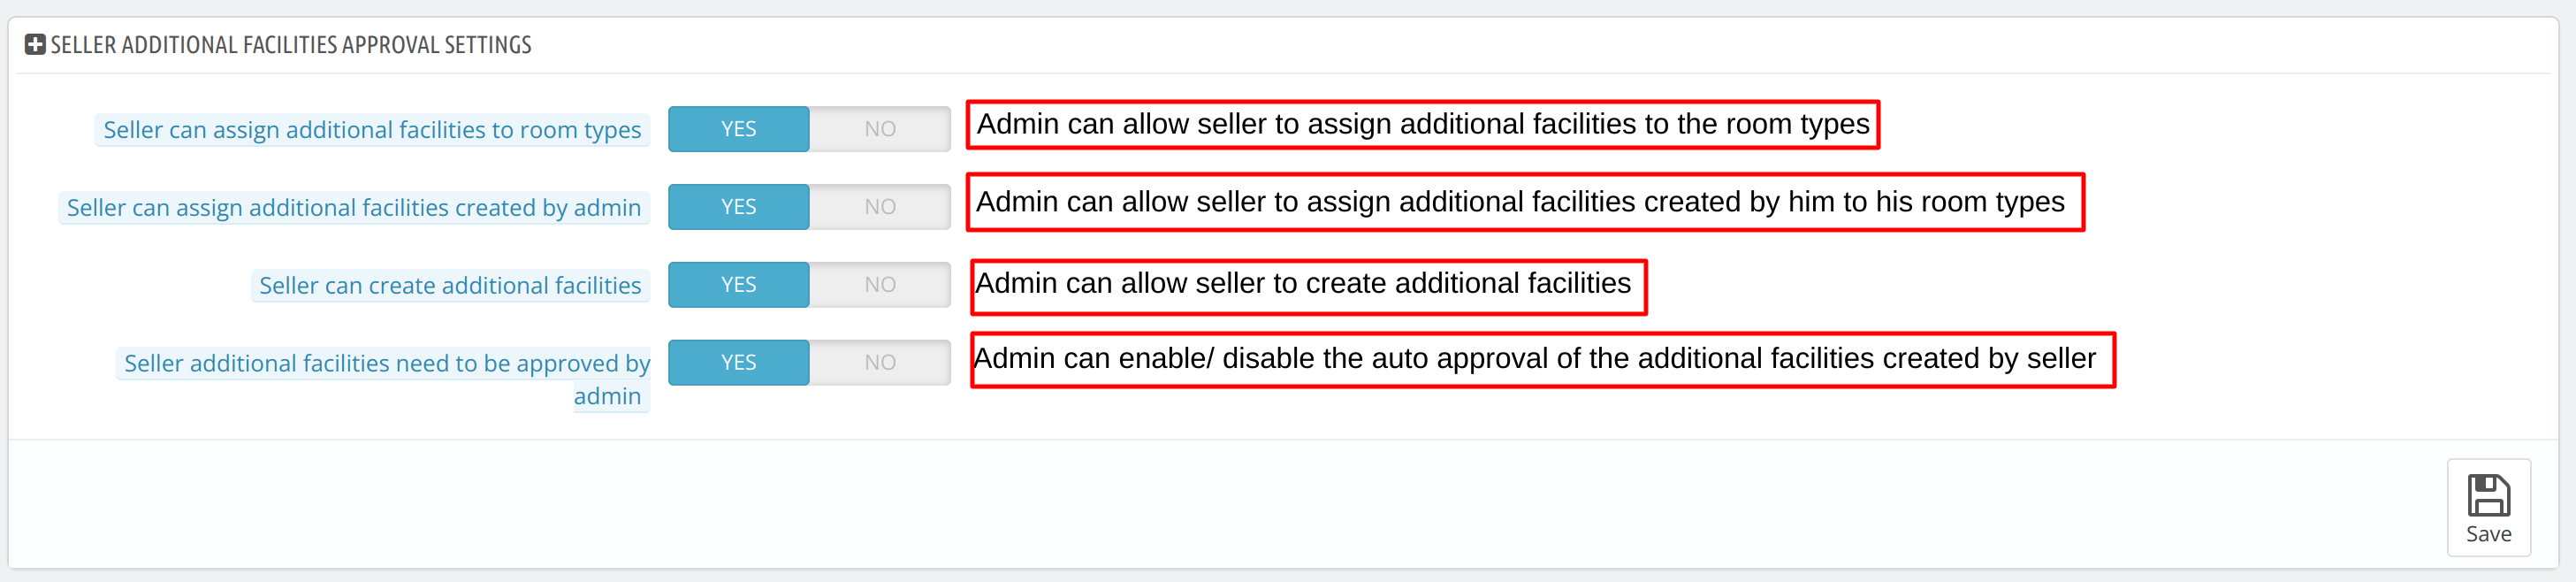 Seller Additional Facilities Approval Settings